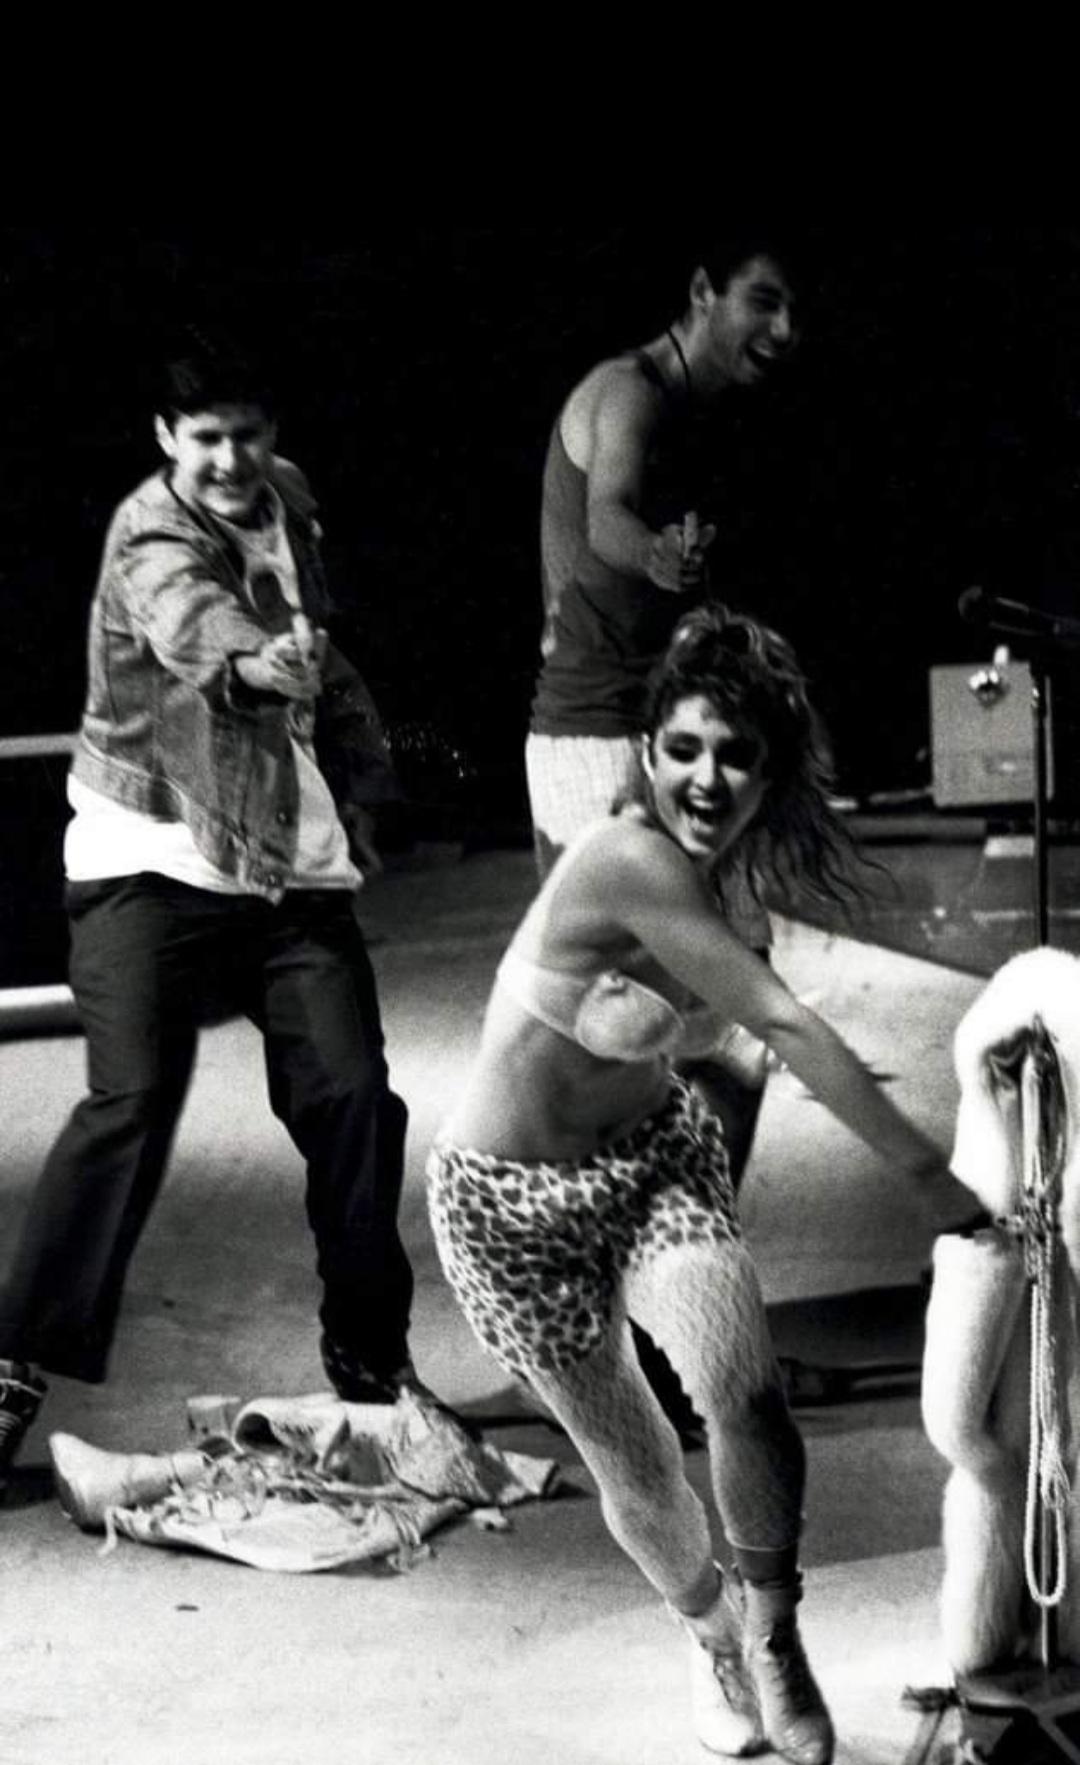 The Beastie Boys chasing Madonna with water guns on stage, 1985